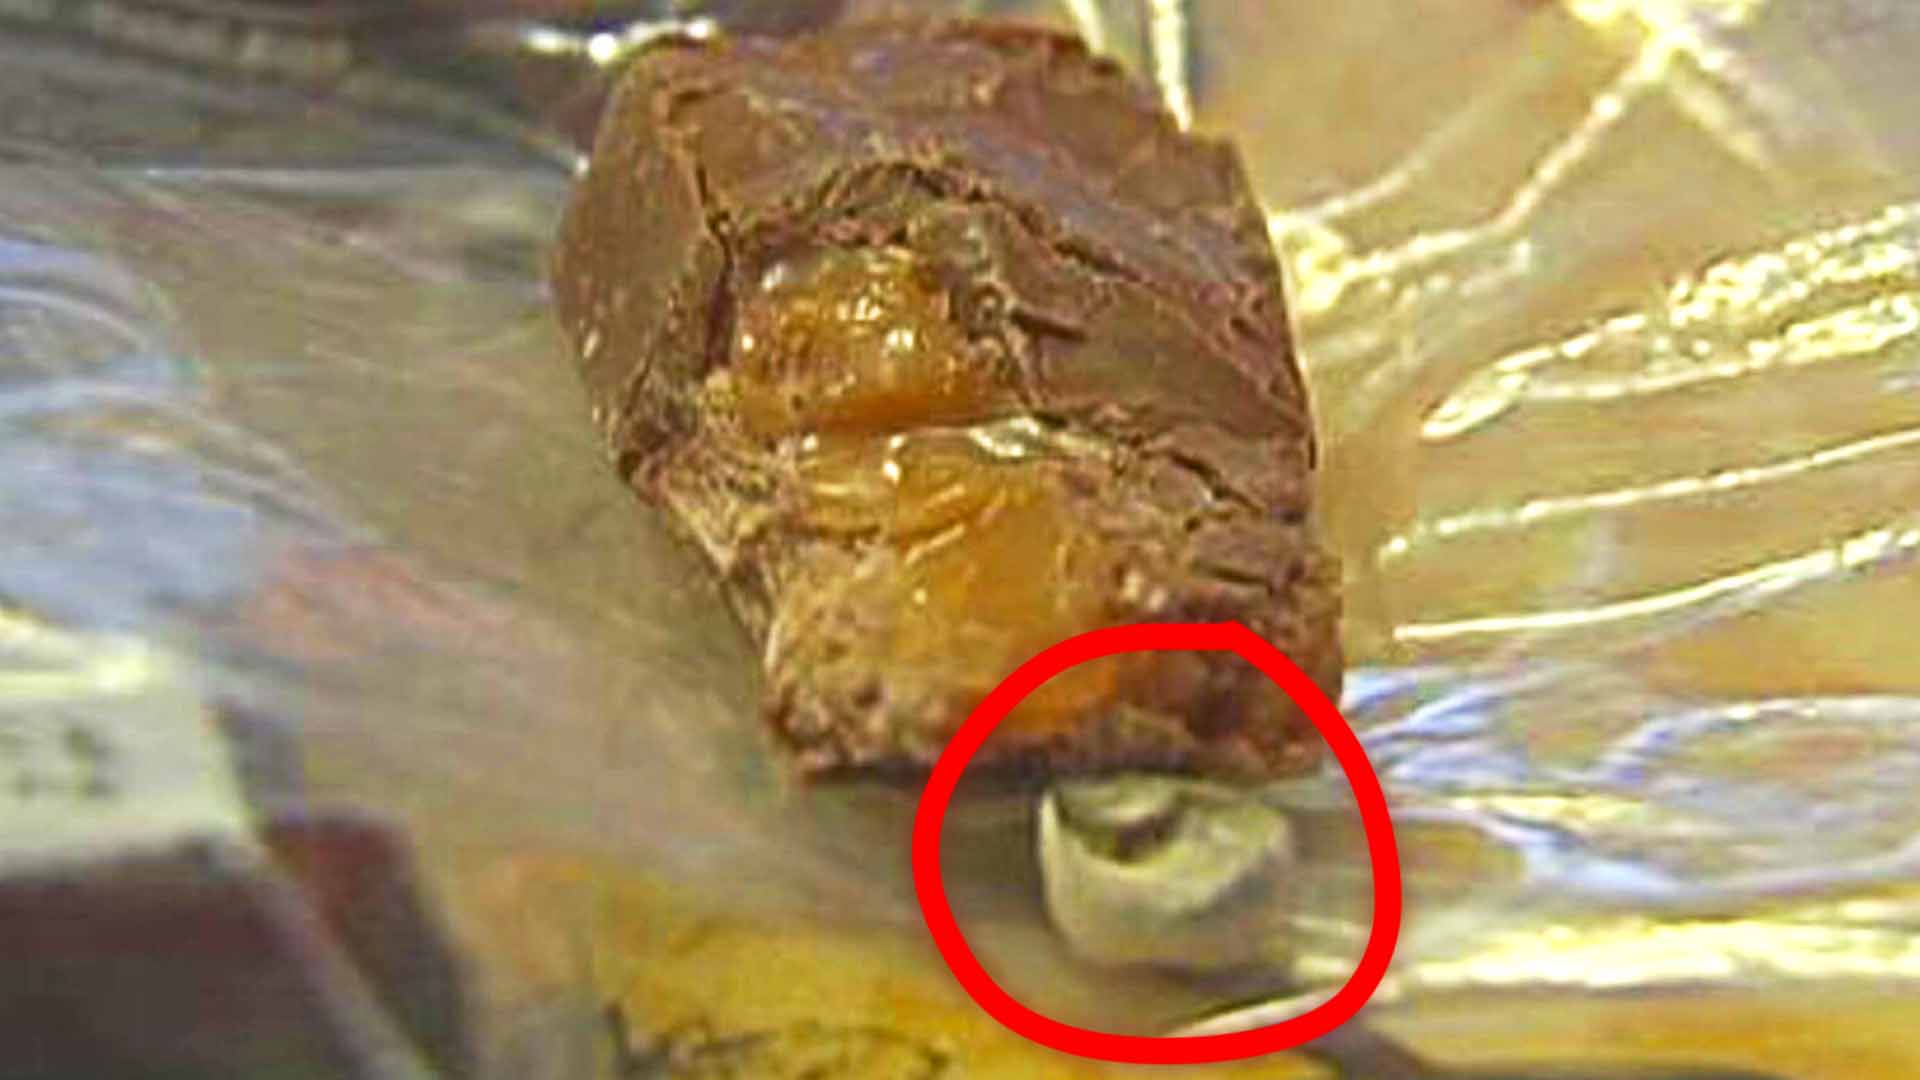 Texas Woman Finds Stranger'S Tooth In Her Milky Way Candy Bar -- A Used Tampon In A Steak. Cockroaches Baked Into Hash Browns. Even Severed Fingers In Chili. Here Are The Most Disgusting And Nasty Things People Found In Their Fast Food Orders.